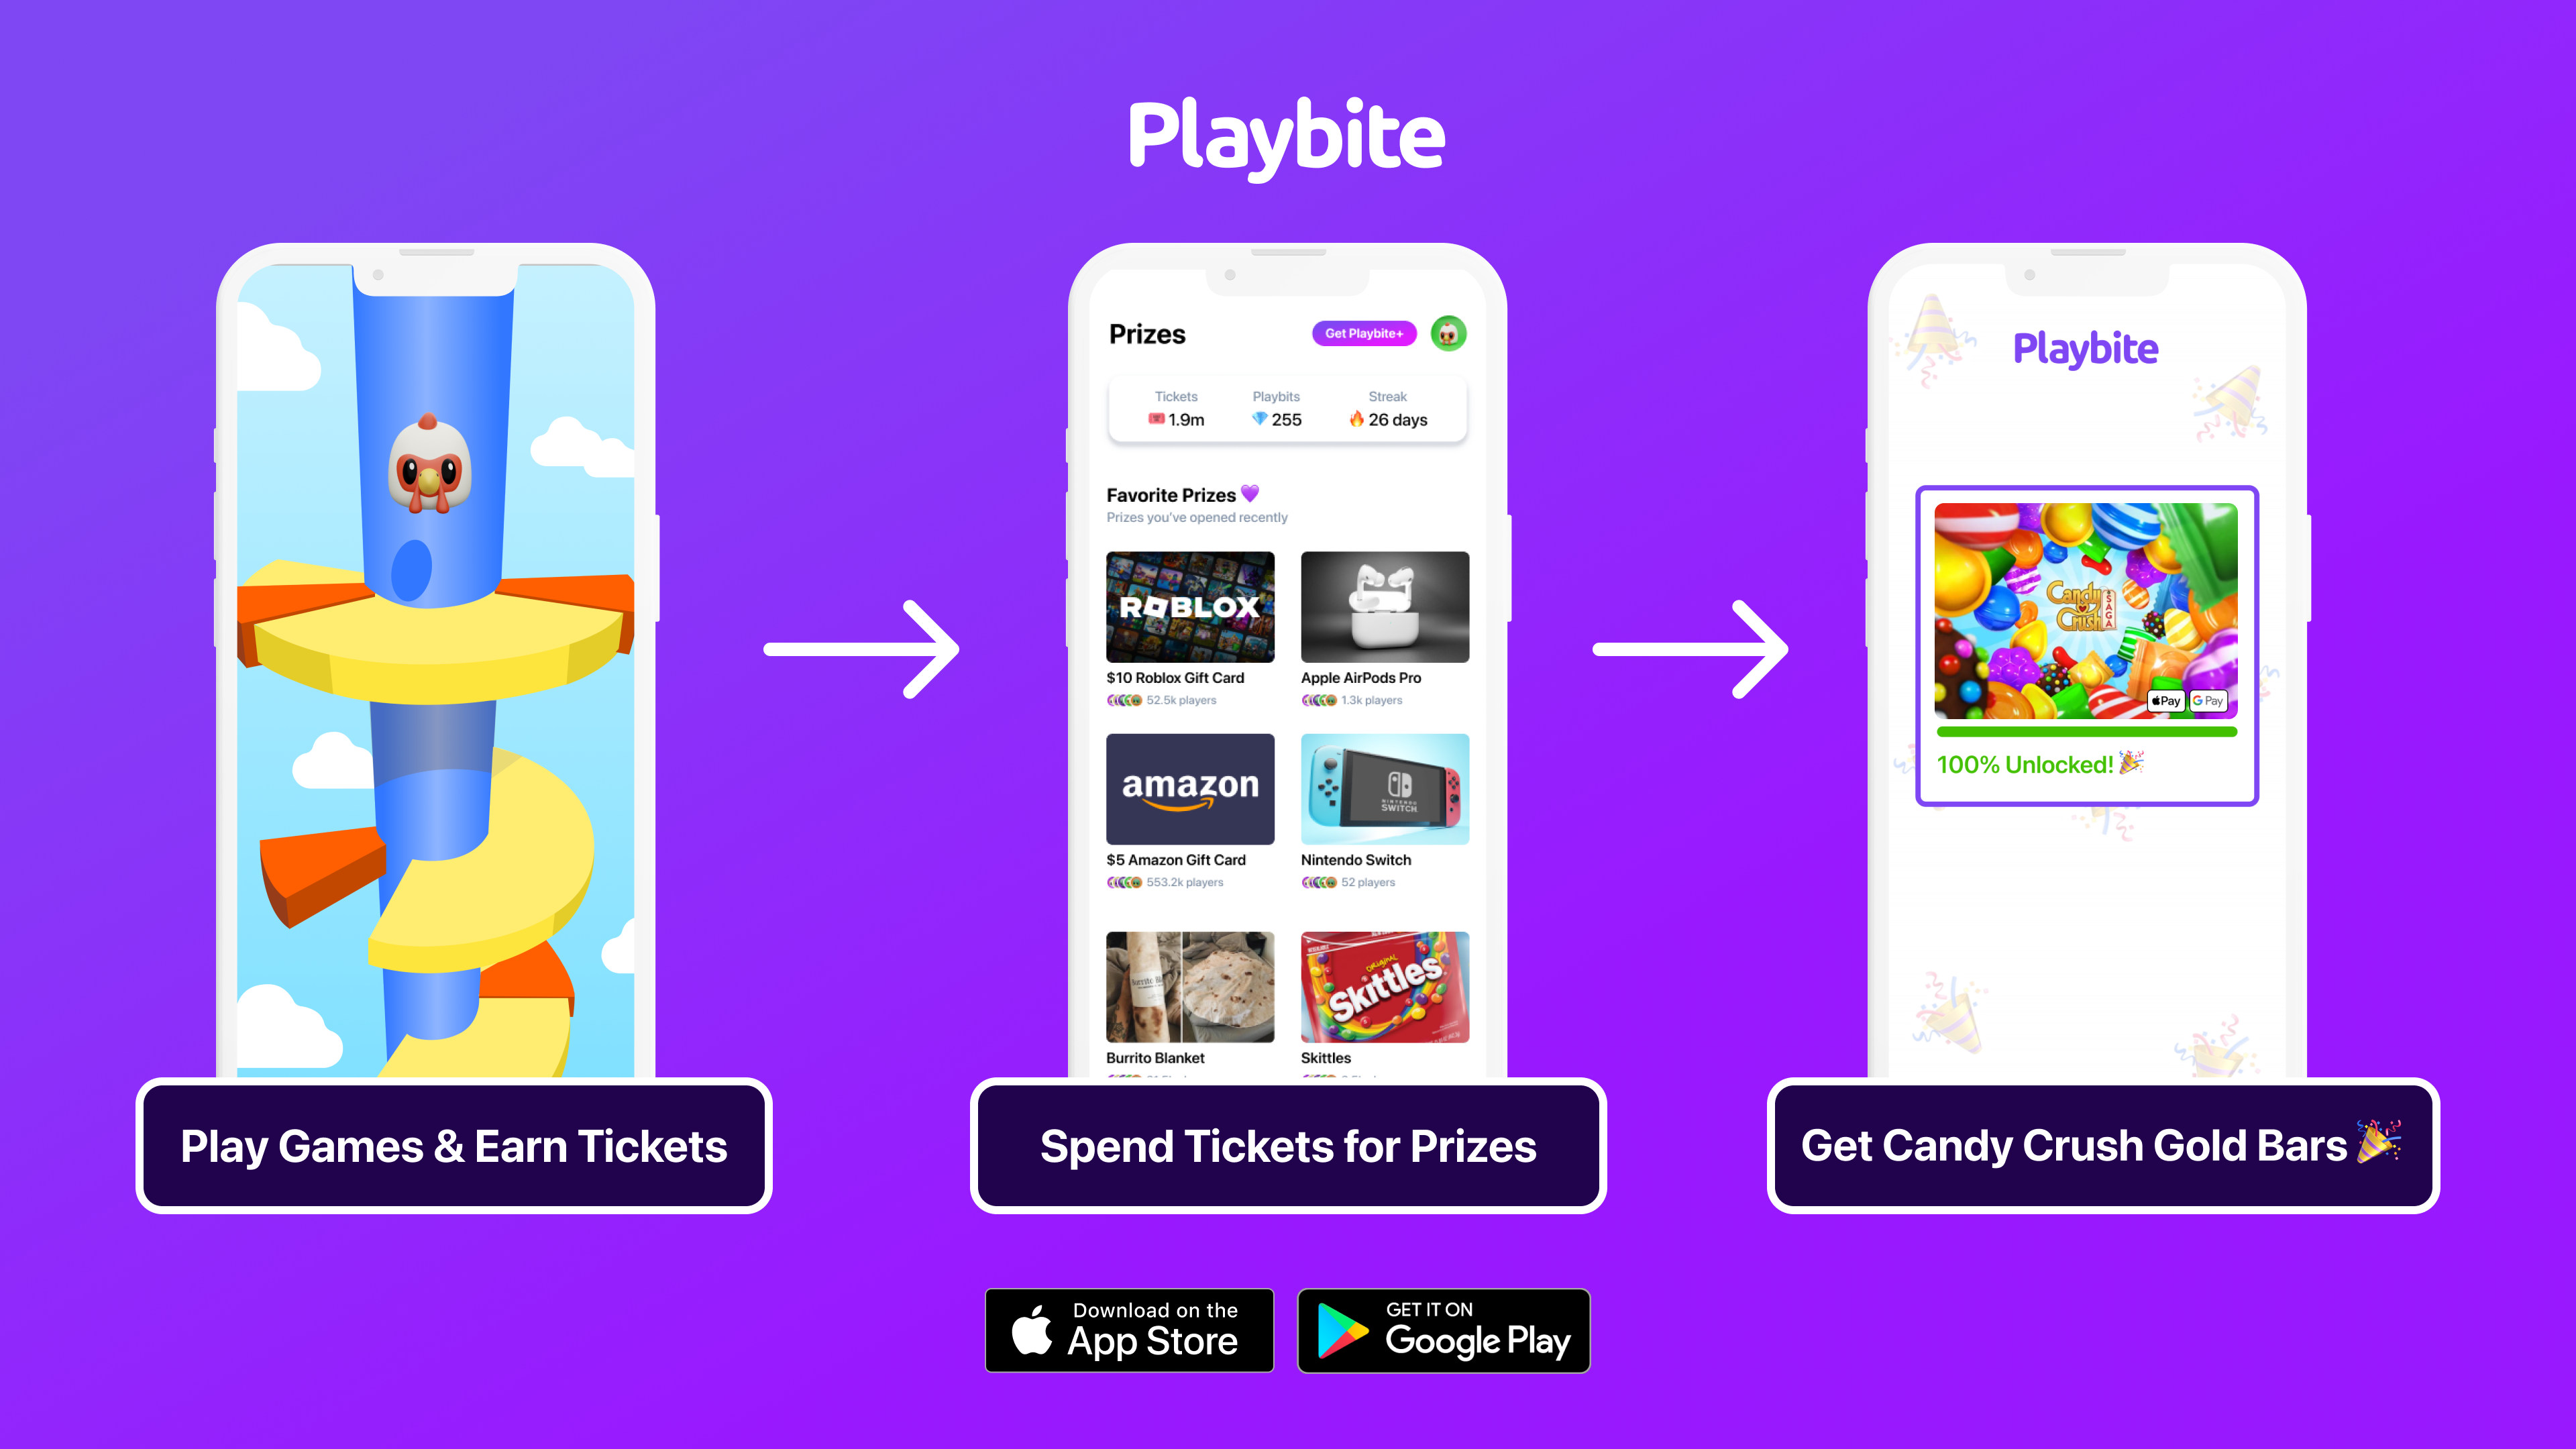 Win Candy Crush Gold Bars by playing games on Playbite